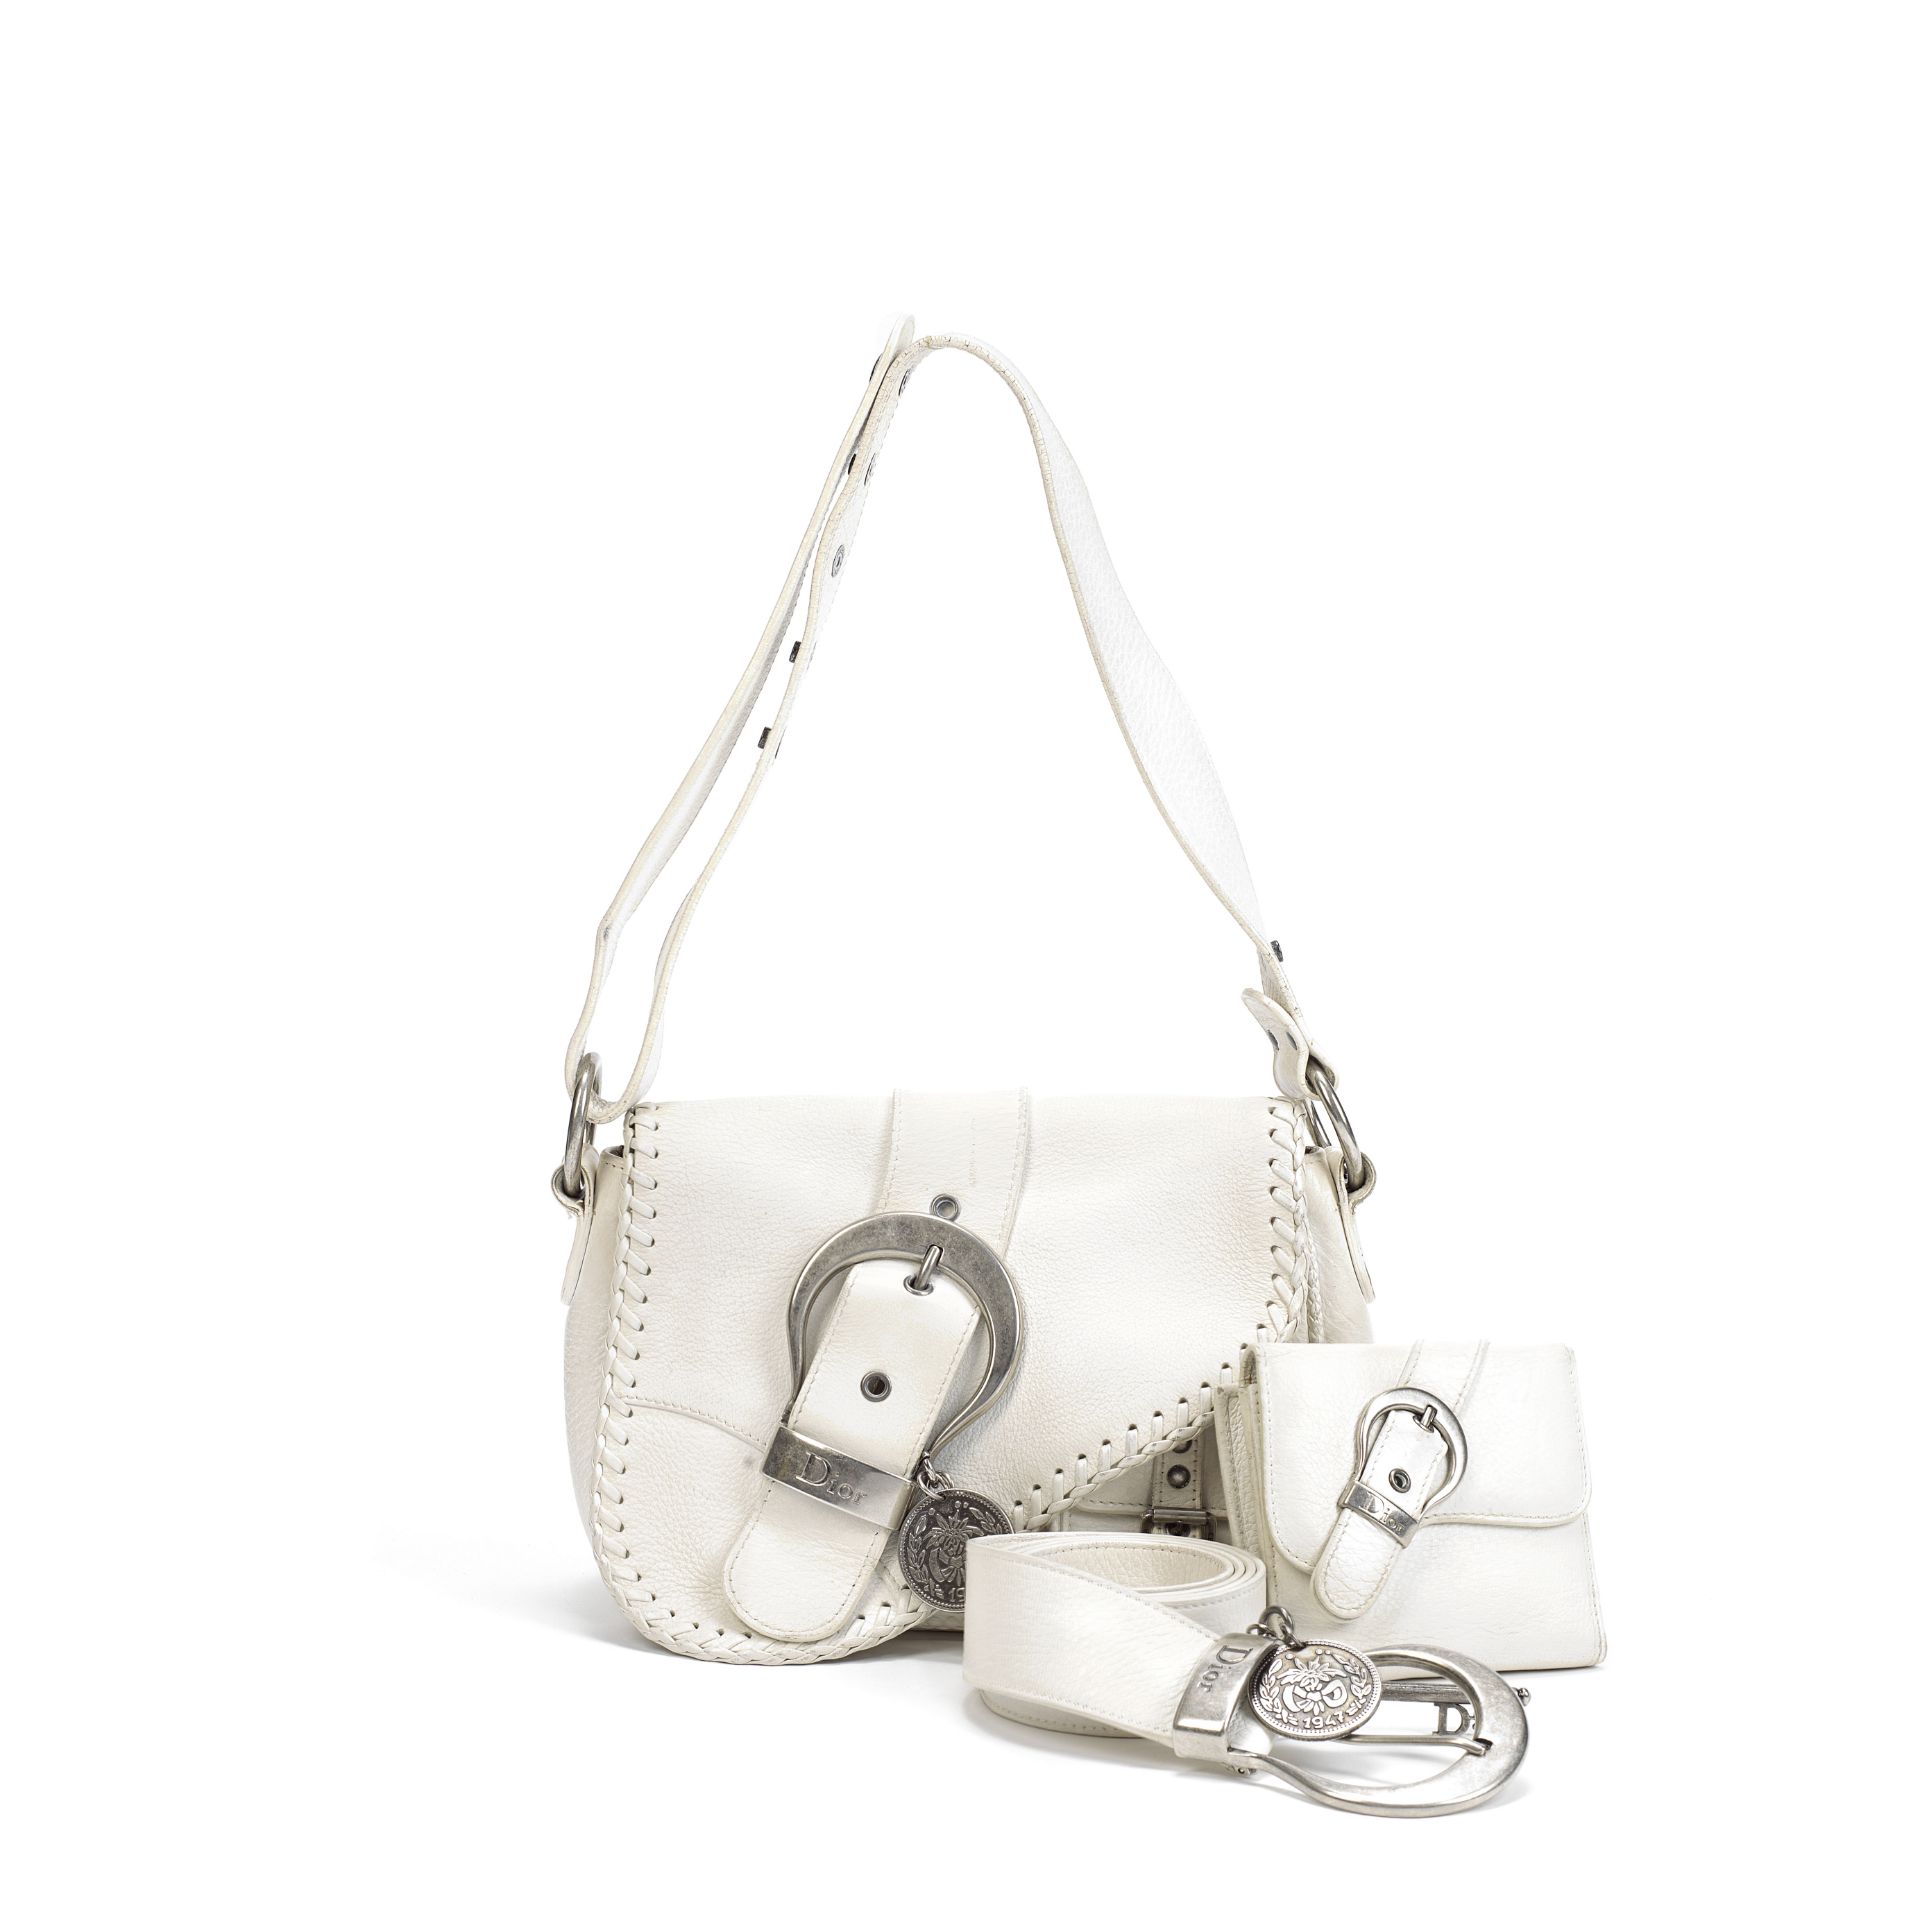 White Gaucho Double Saddle Bag, Wallet and Belt, Christian Dior, c. 2009, (Includes authenticit...